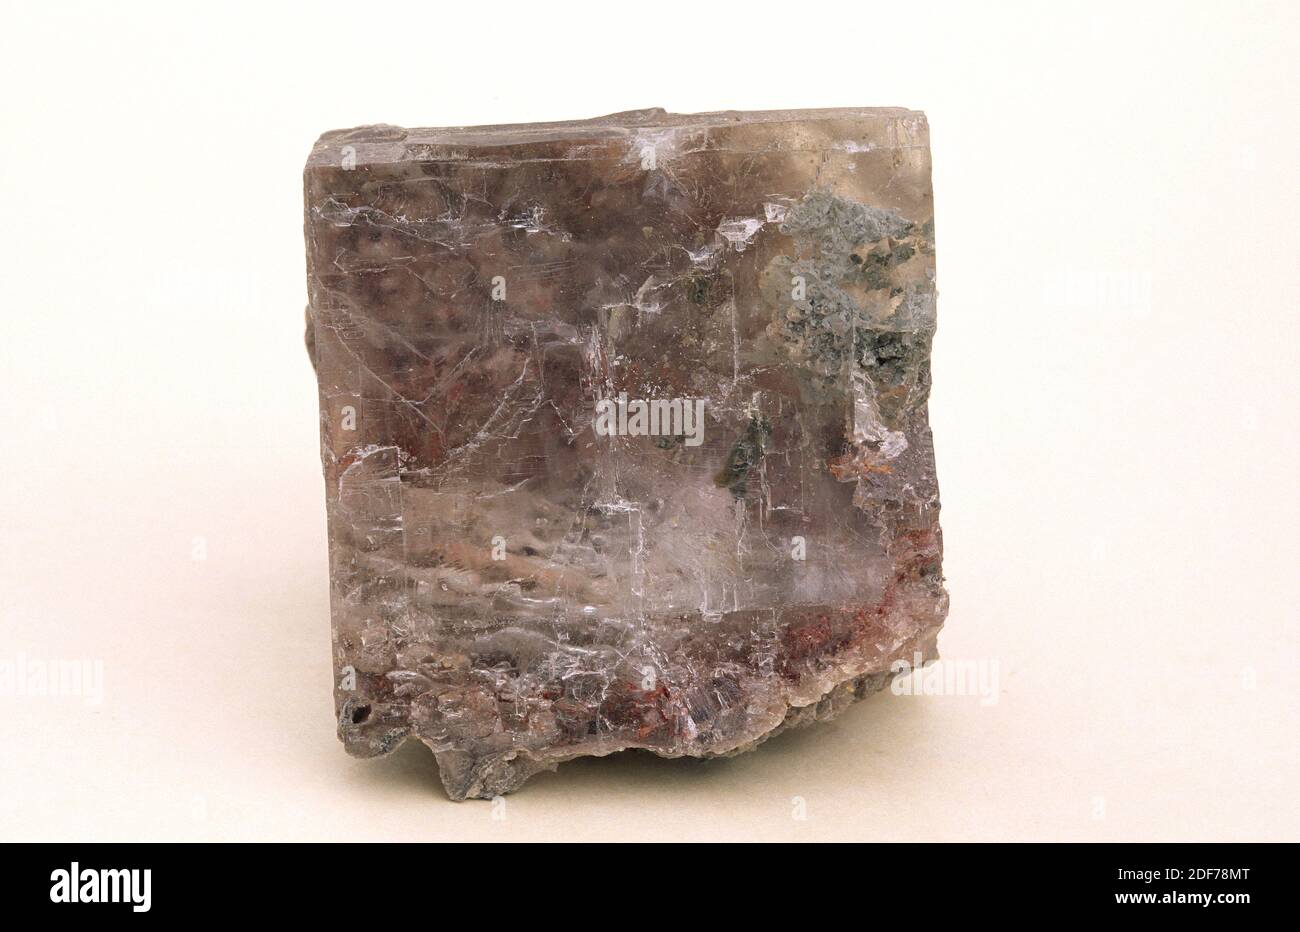 Halite or rock salt is a sodium chloride mineral. Sample. Stock Photo